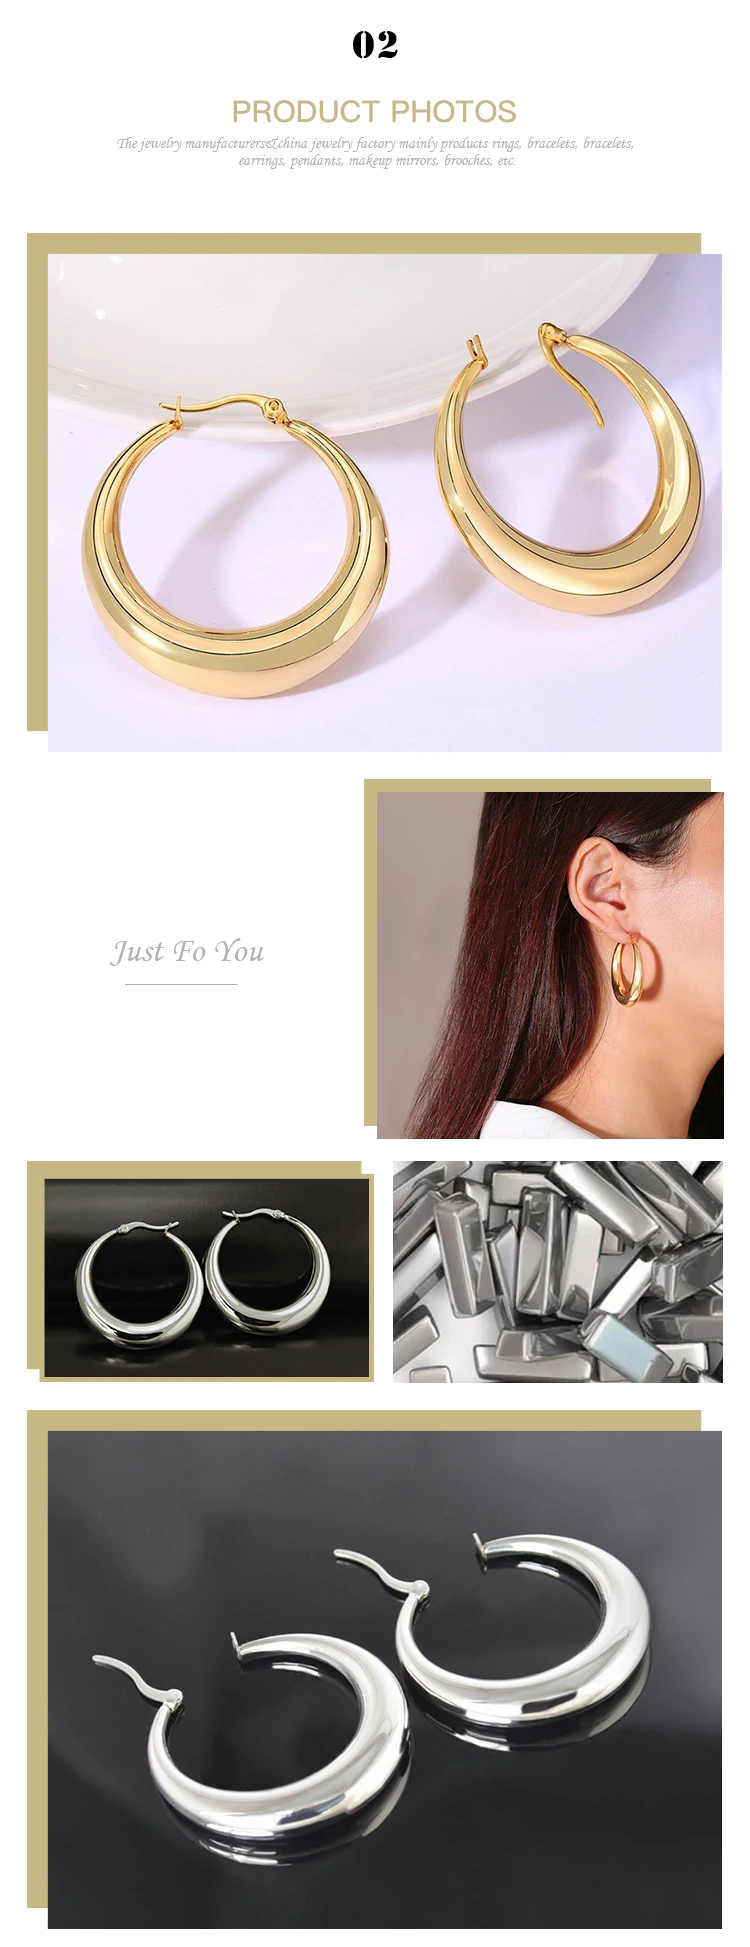 2020 Hot Women's Stainless Steel Gold Plated Earrings Jewelry EH-064